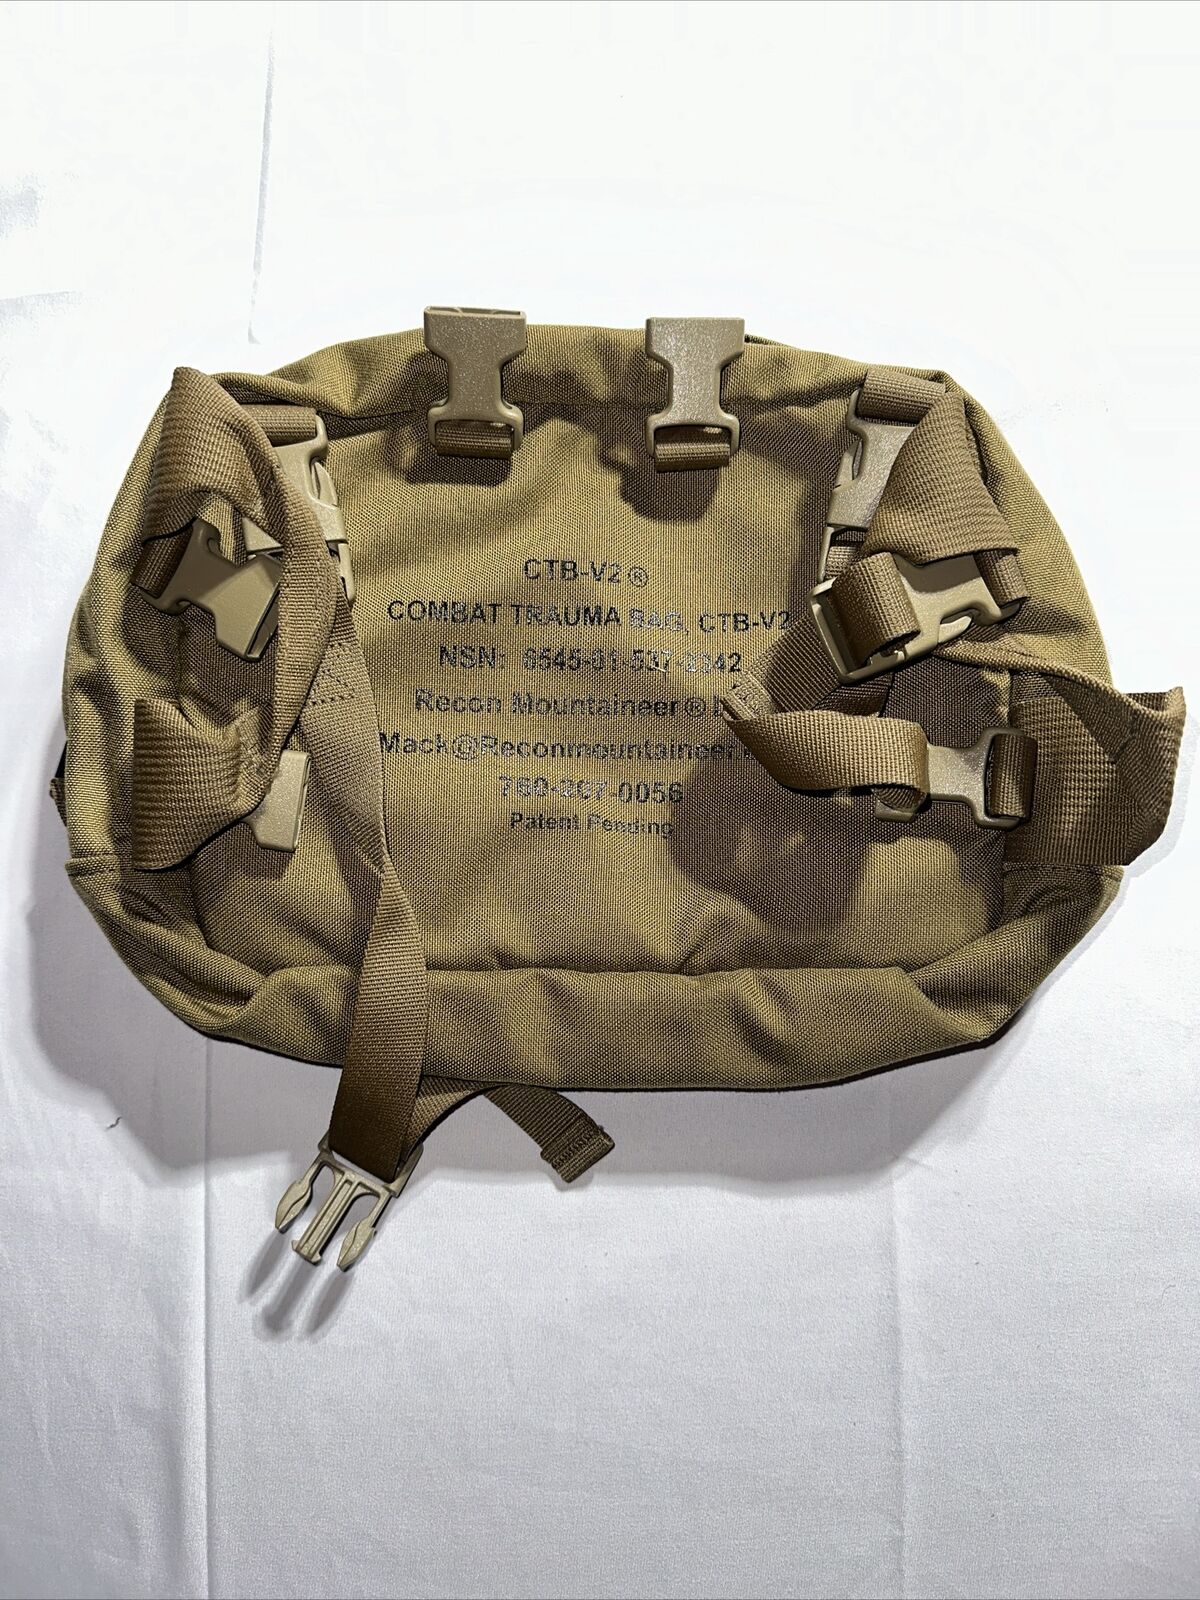 Combat Trauma Bag CLS CTB V2 Mountaineer Recon USA Army -MINT COND